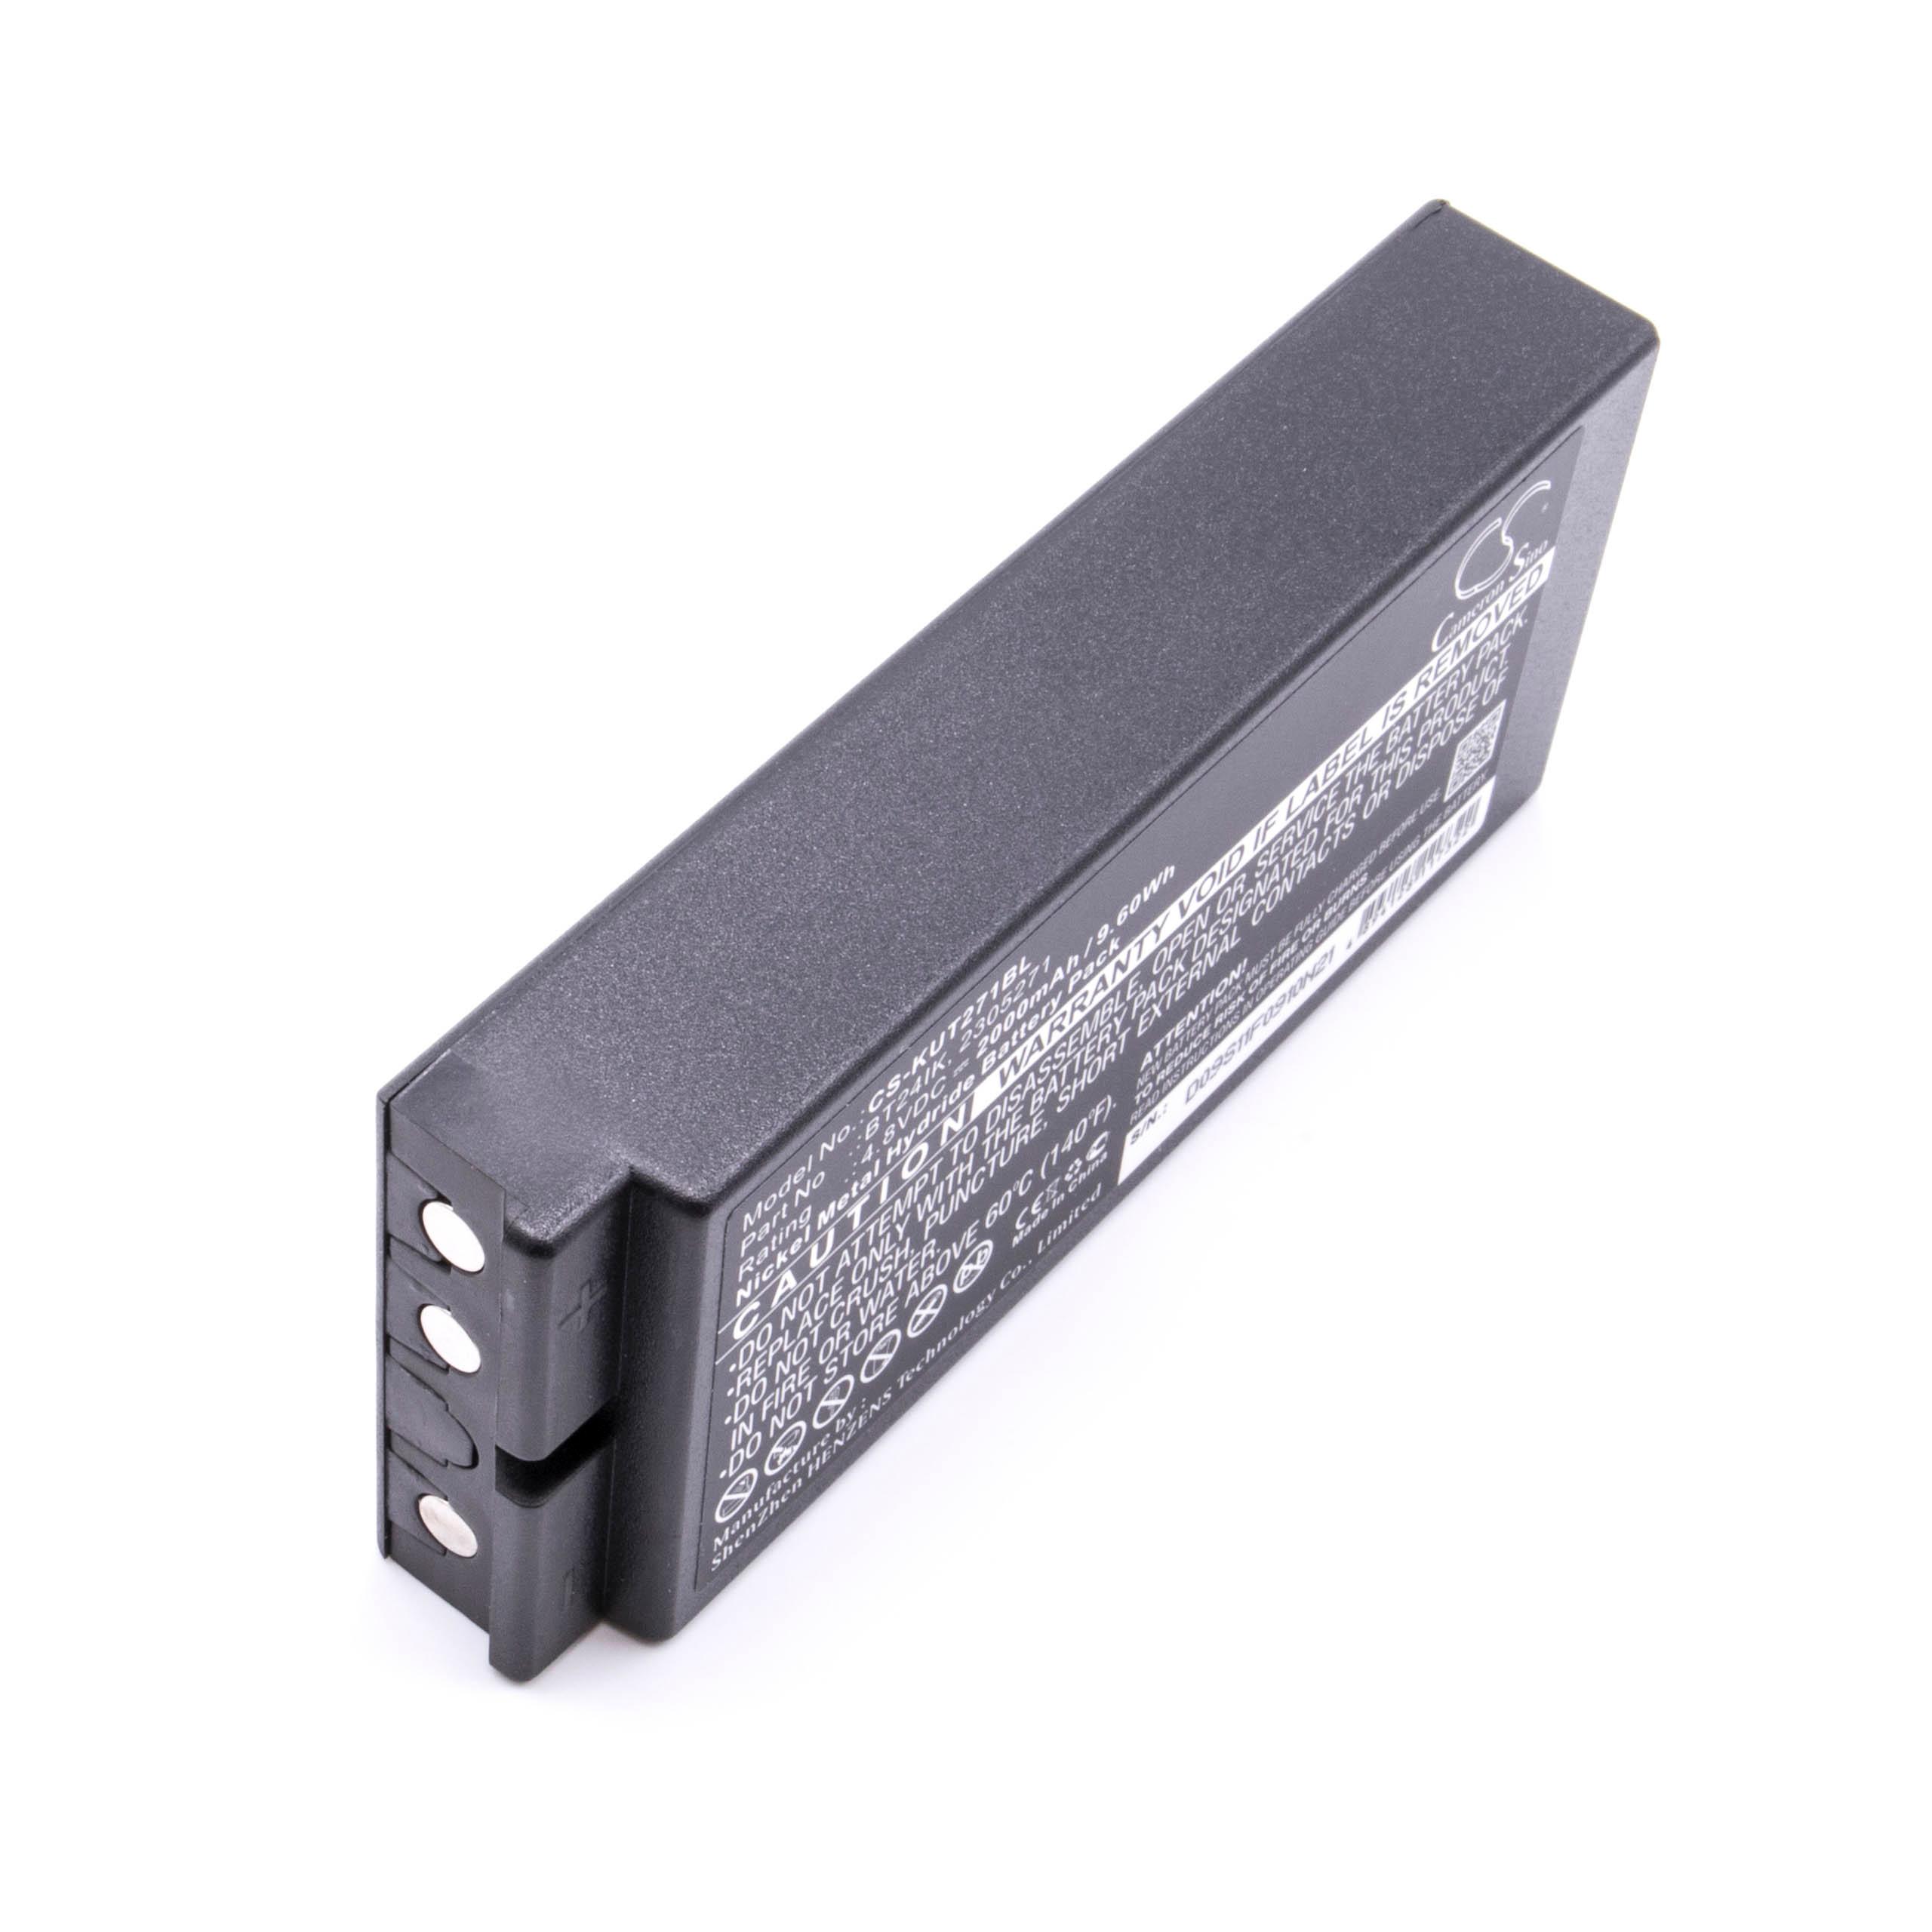 Industrial Remote Control Battery Replacement for Danfoss 2305271, BT24IK - 2000mAh 4.8V NiMH